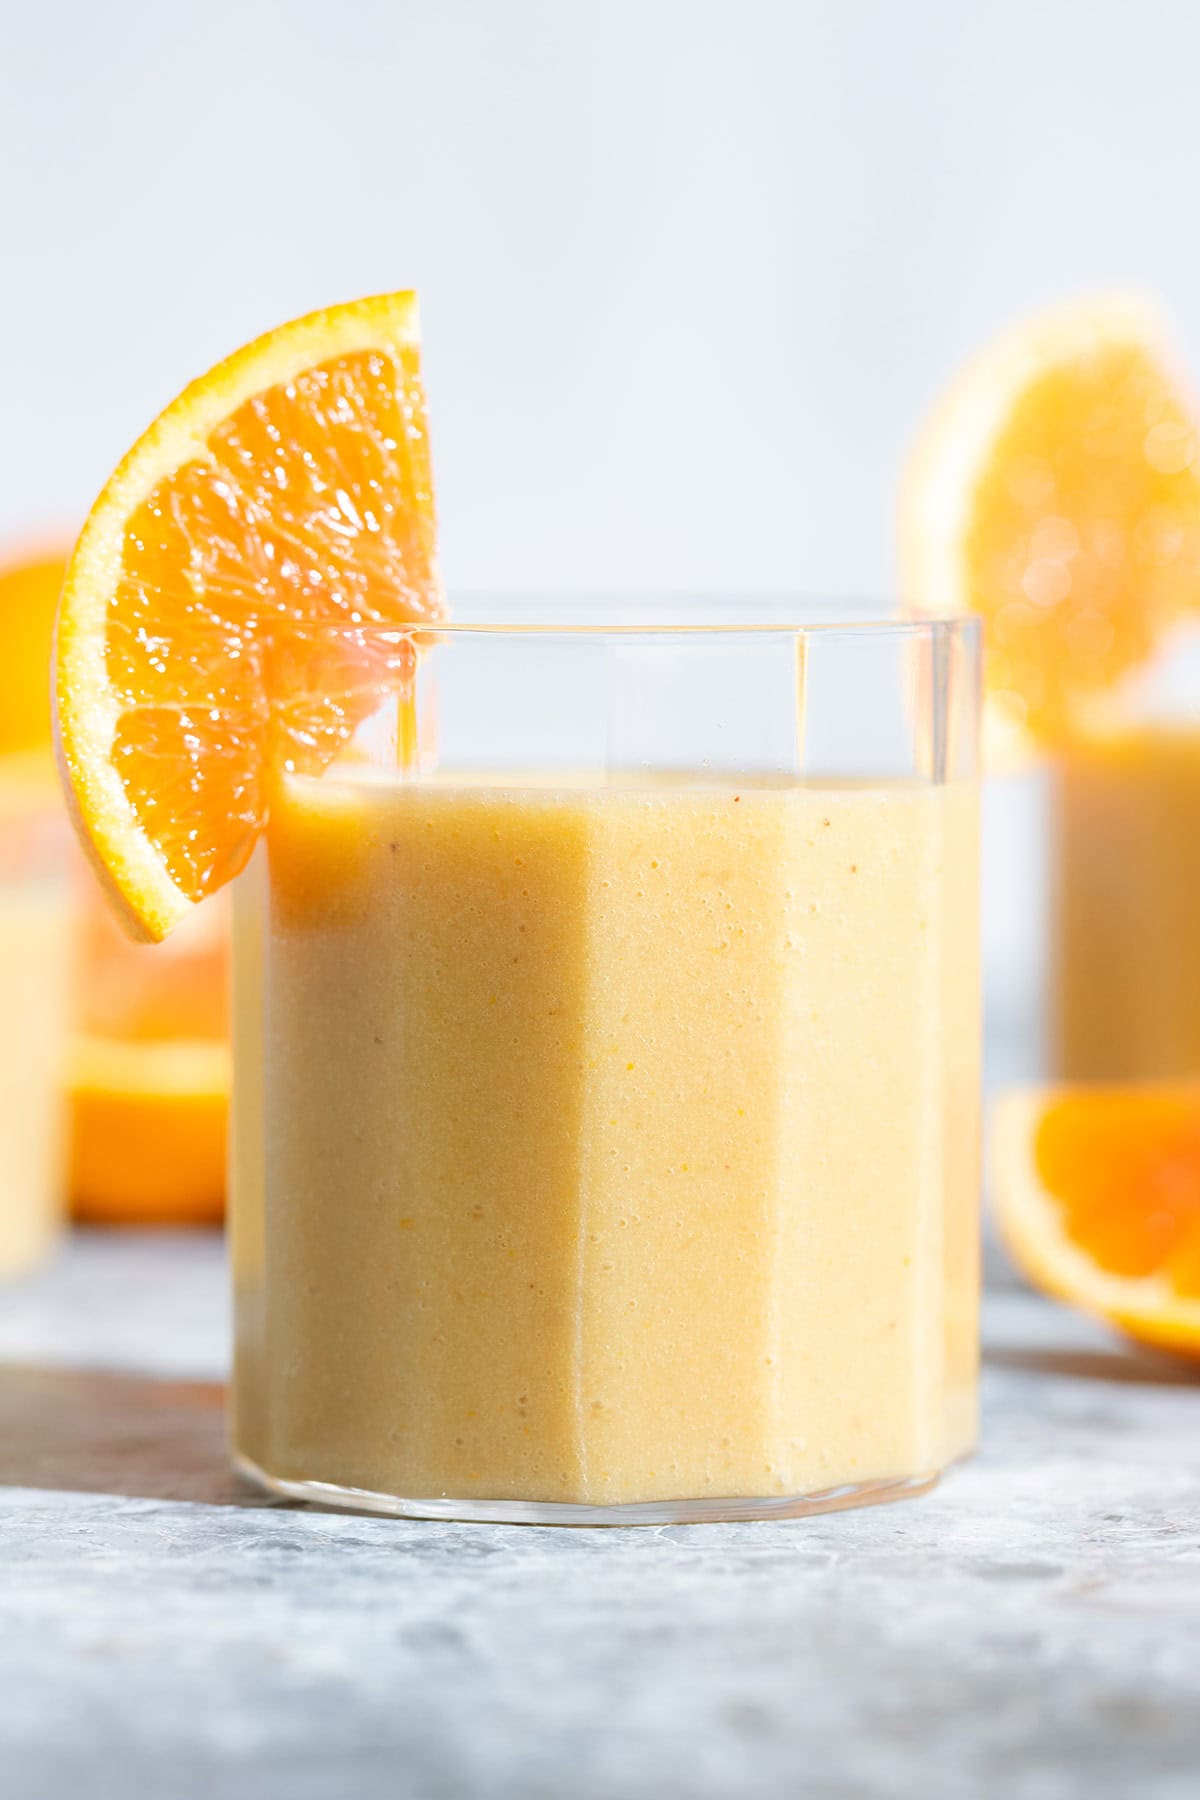 Bright orange smoothie in a small glass garnished with a slice of fresh orange.